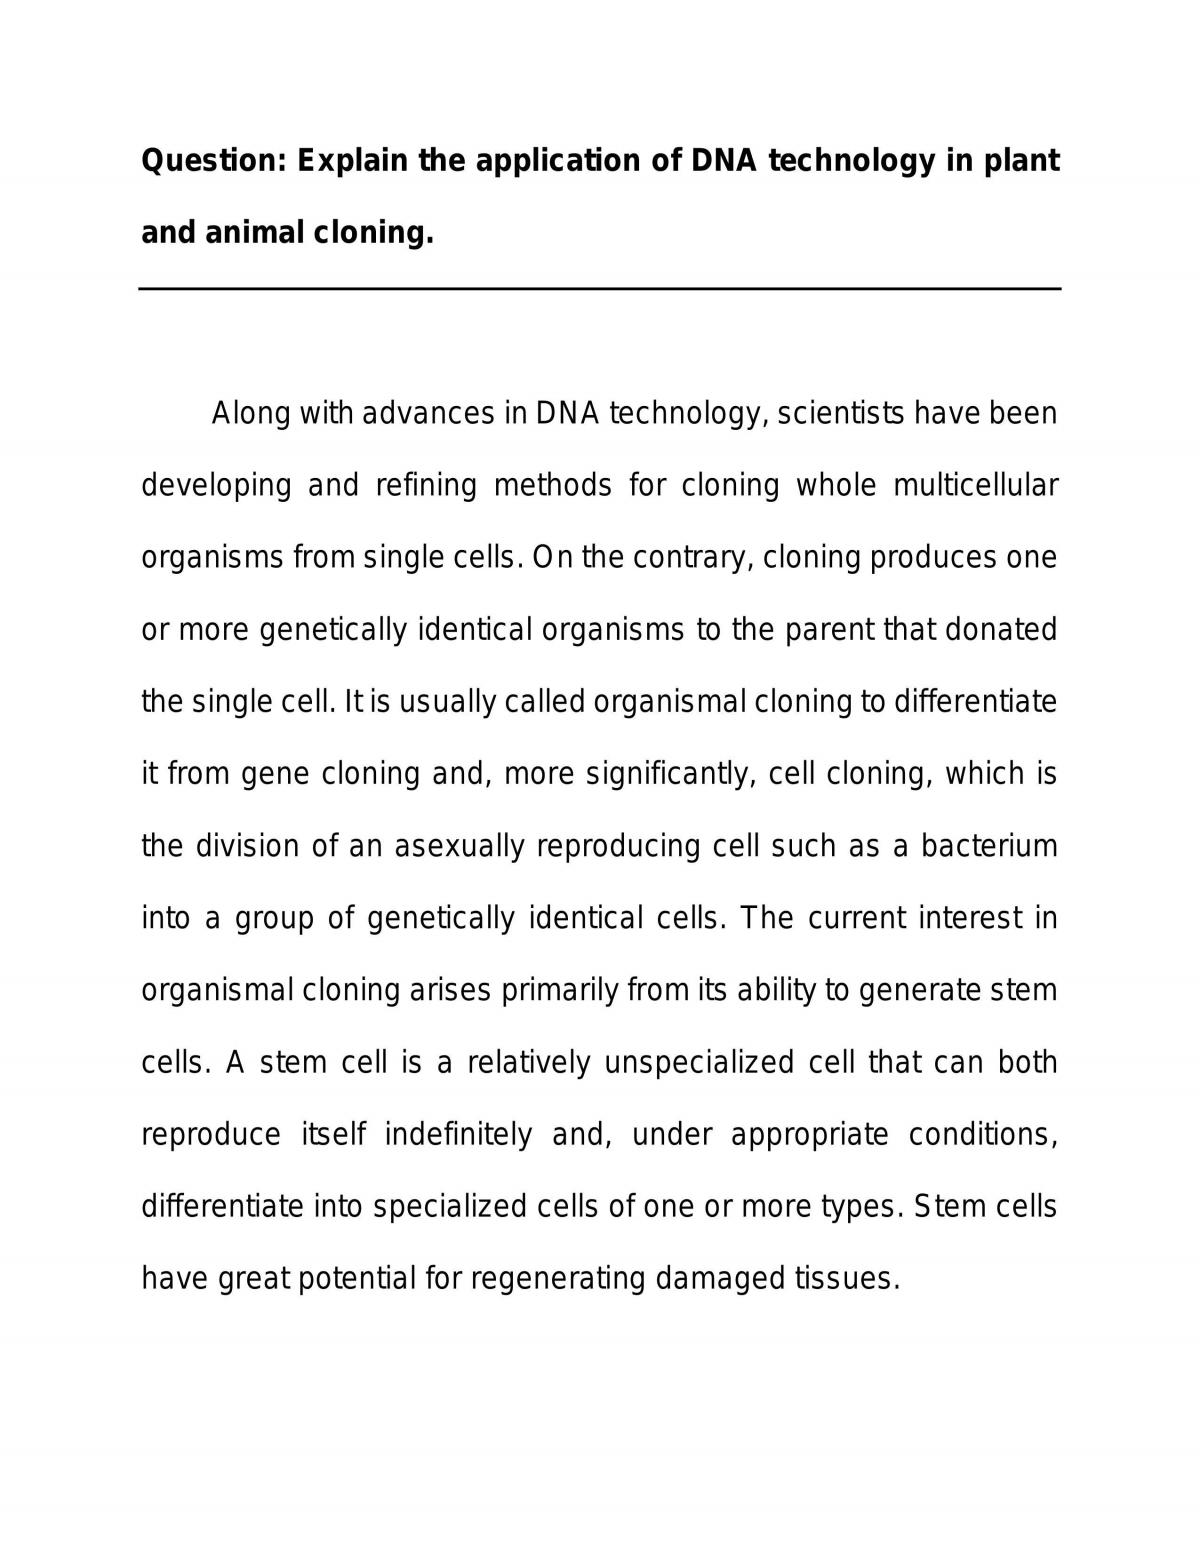 essay about cloning animals